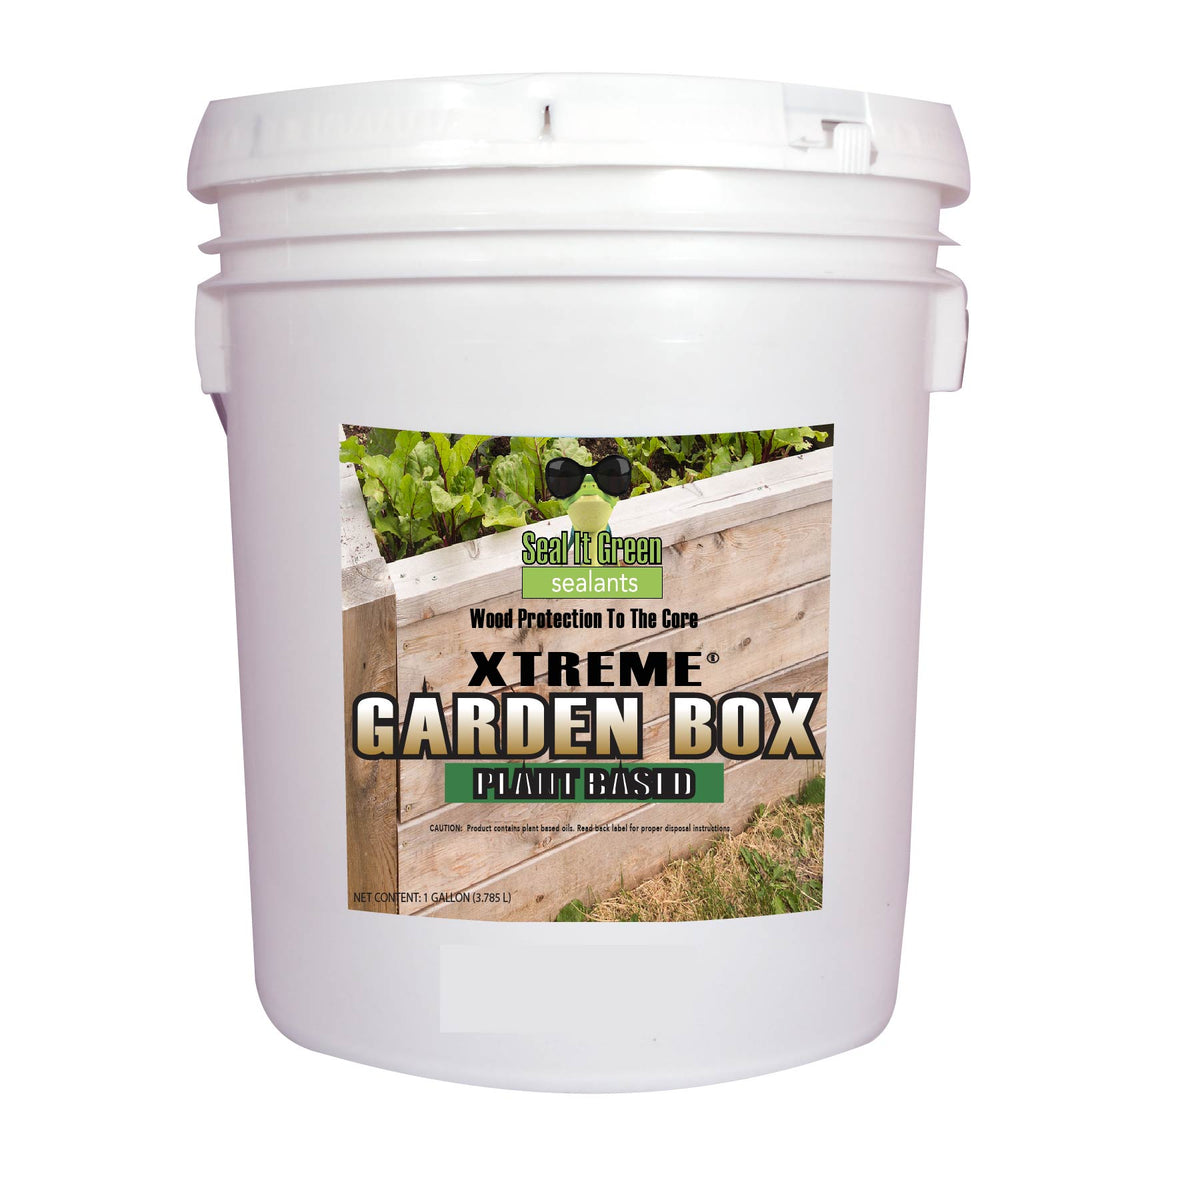 Seal It Green Garden Box 5 Gallon Pails Of Wood Stain Safe For Vegetable Garden.  Plant And Pet Safe